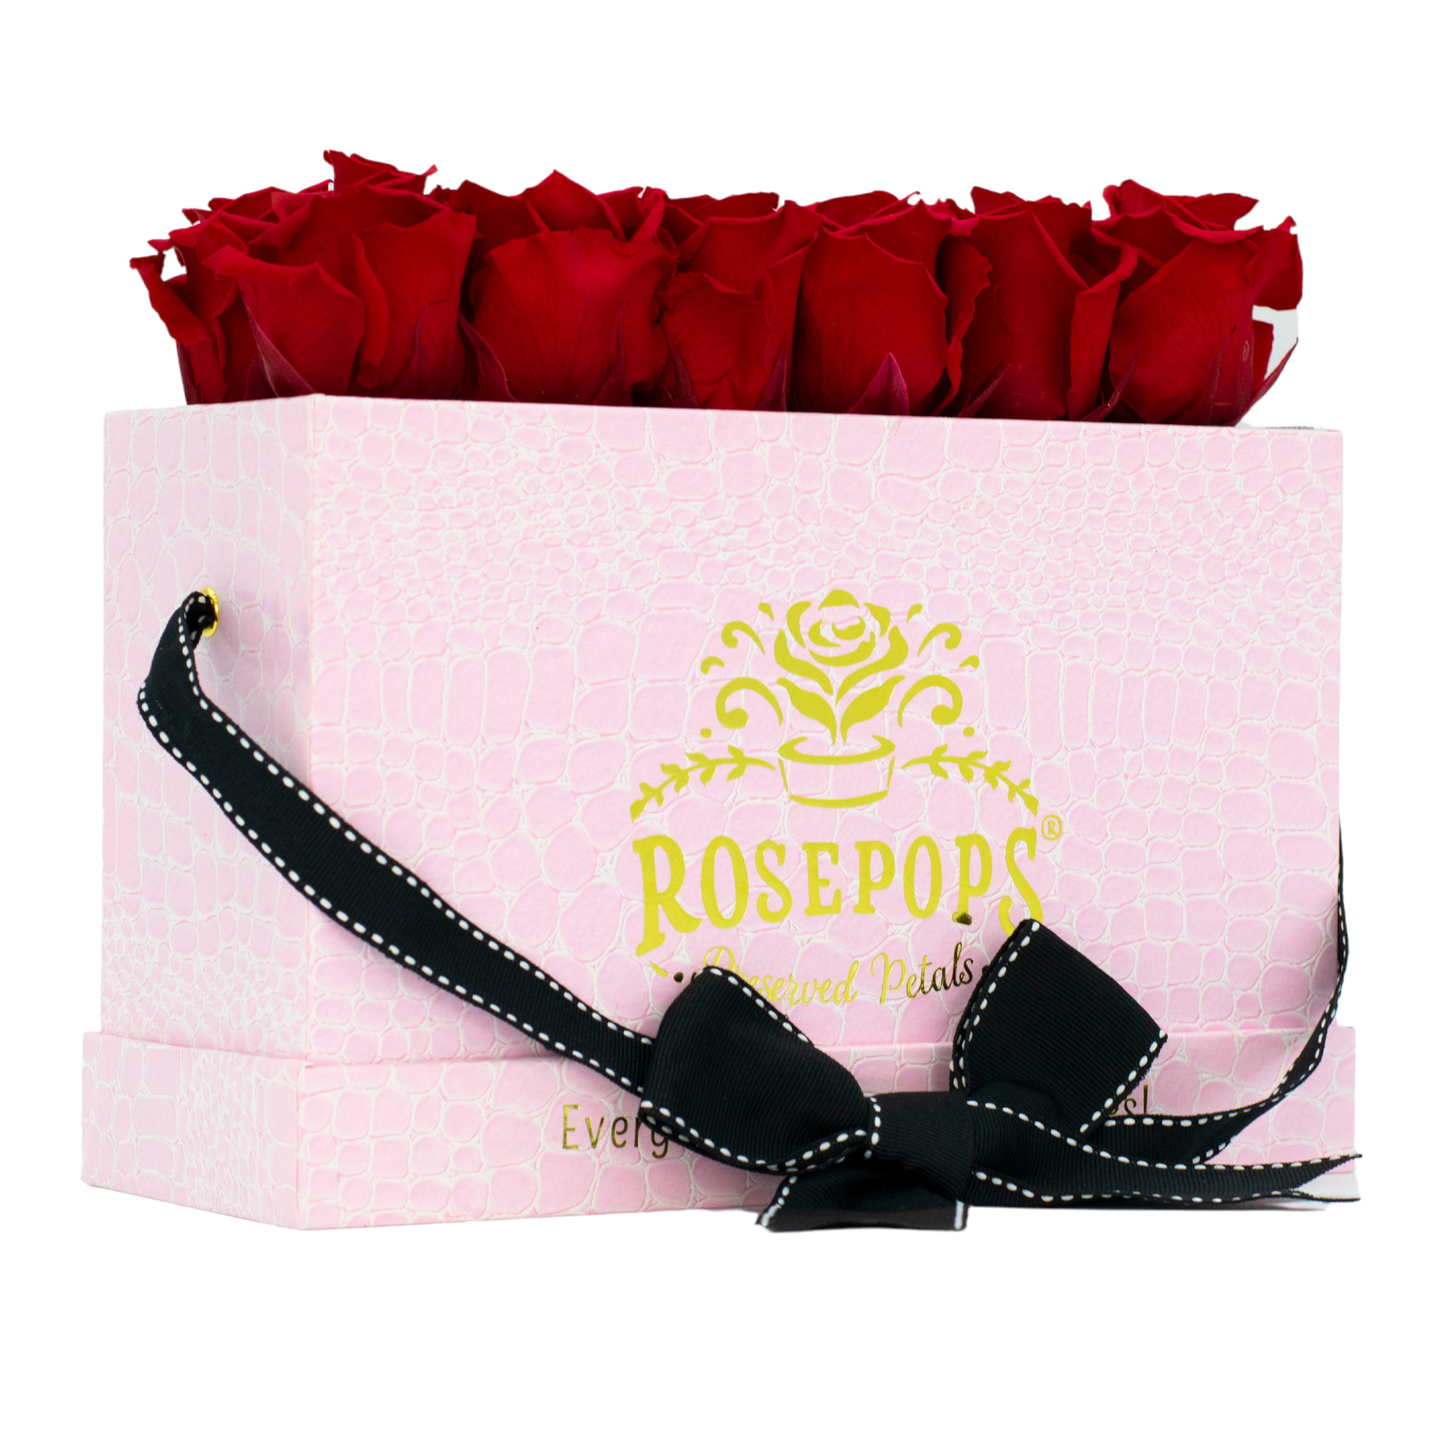 The Pink Monogrammed Keeper by the Dozen - Cherry Roses